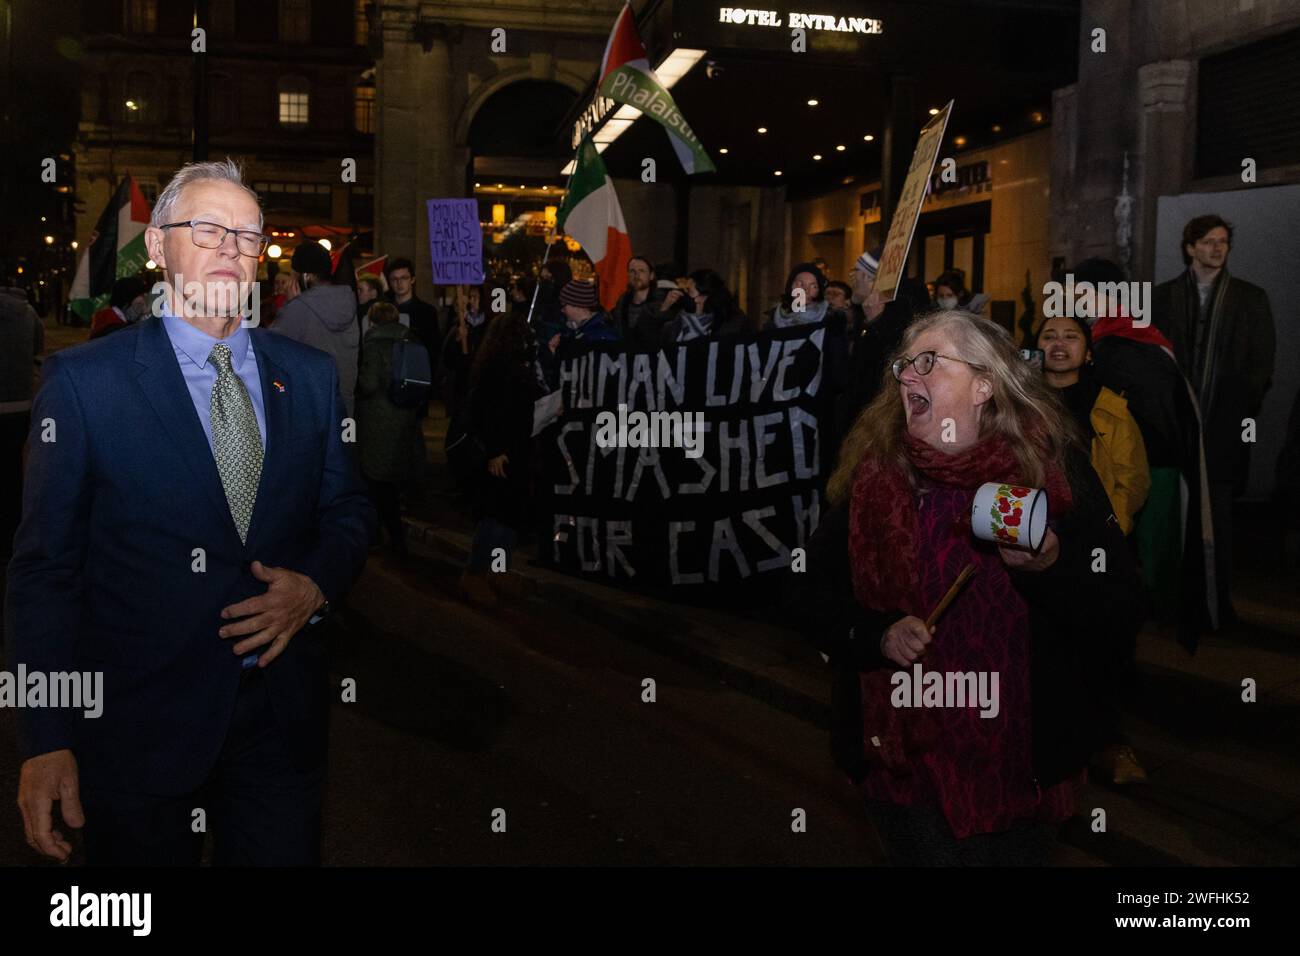 London, UK. 30th January, 2024. A guest arriving at the JW Marriott Grosvenor House Hotel for the ADS Annual Dinner encounters a protest by campaigners against the arms trade. The ADS Annual Dinner brings together representatives of companies from the UK's aerospace, defence, security and space industries. Sponsors of the event include BAE Systems which supplies components for F-35 combat aircraft used by Israel during its invasion of Gaza. Credit: Mark Kerrison/Alamy Live News Stock Photo